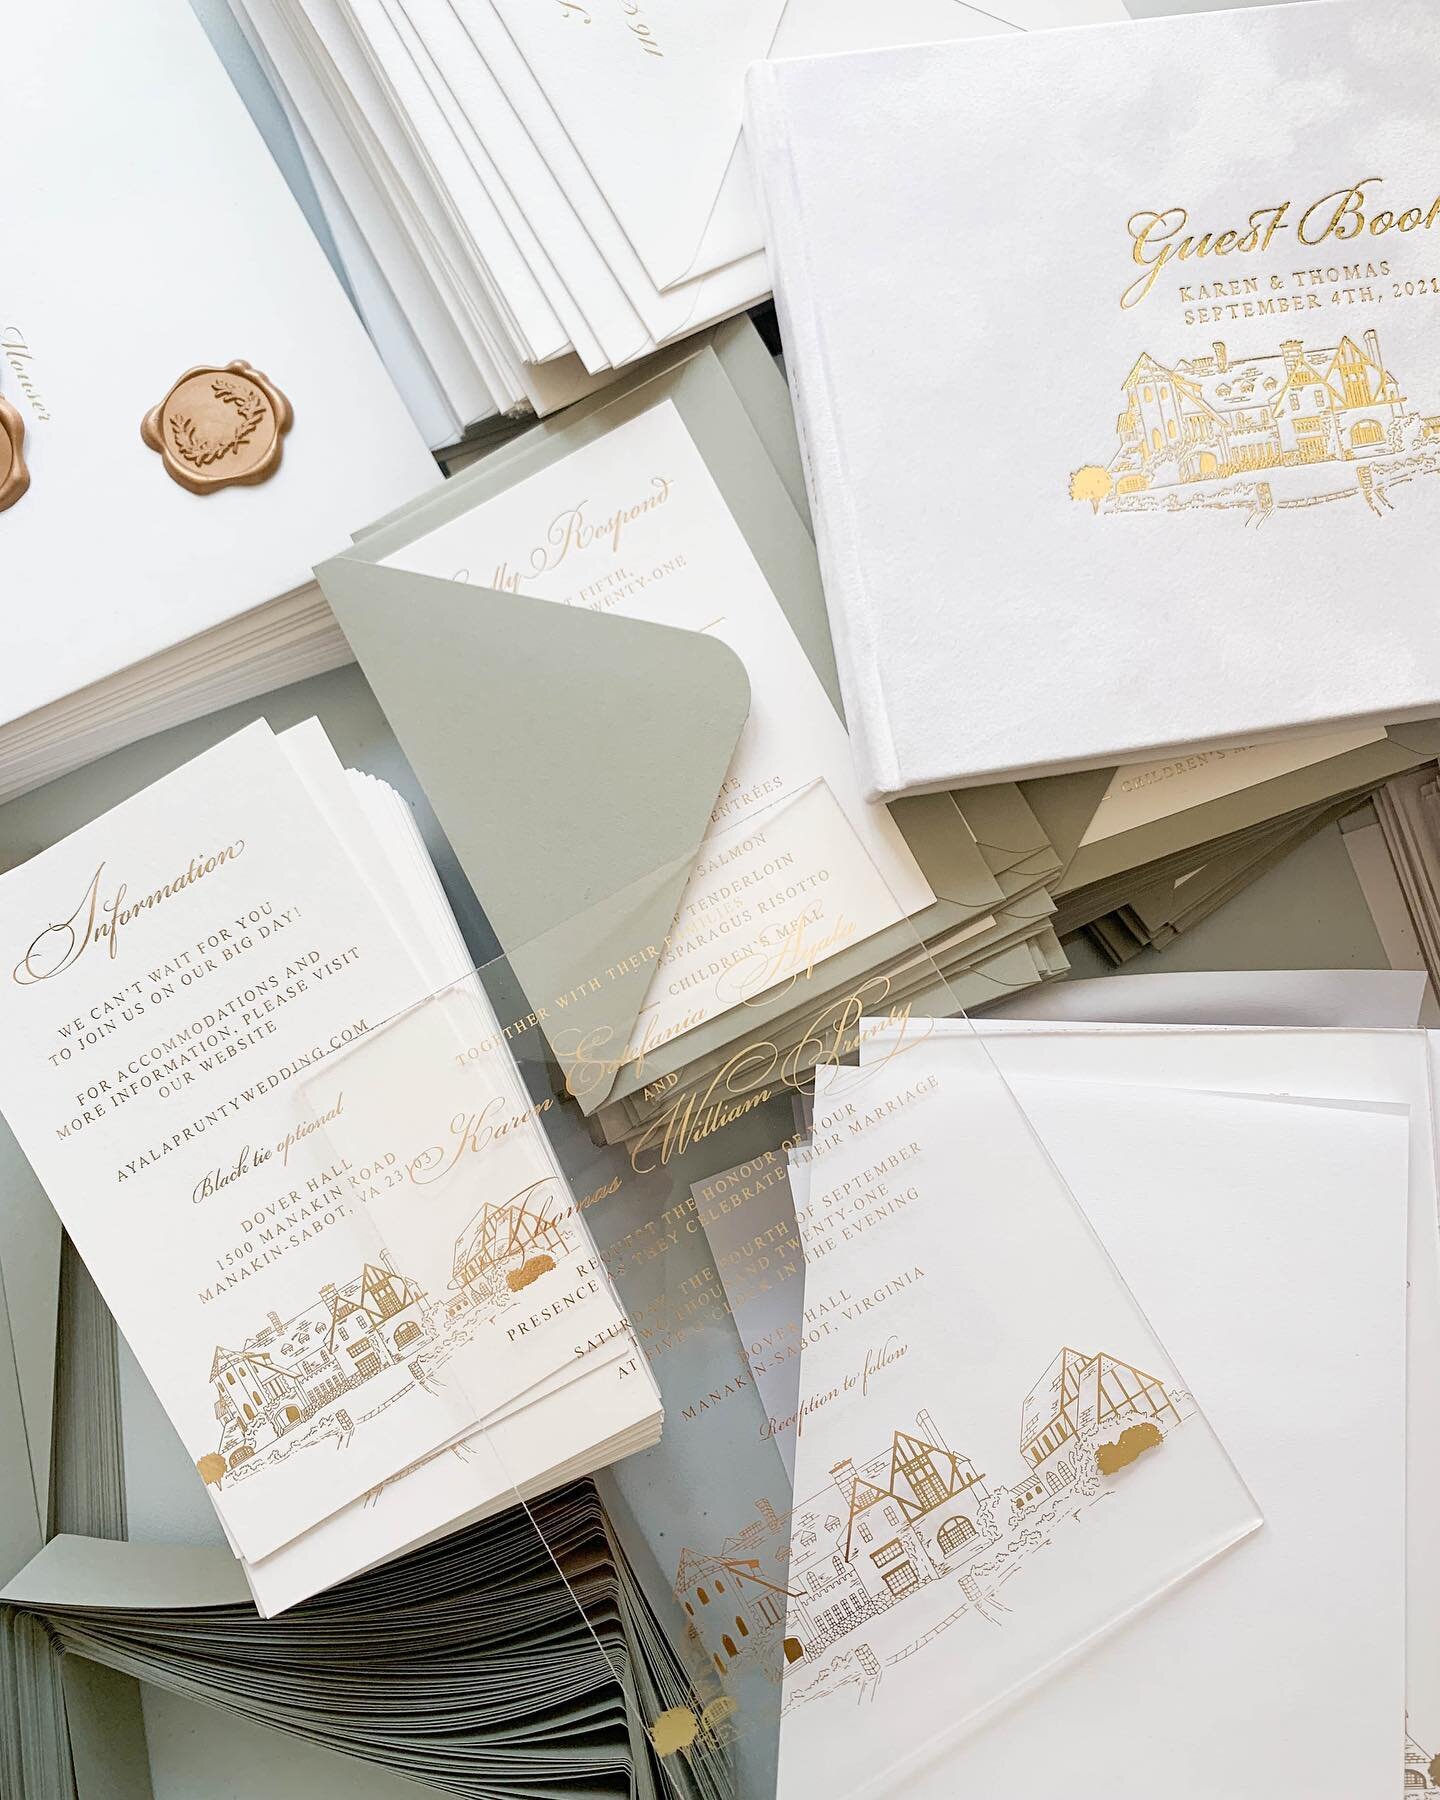 We absolutely adore how this stationery suite turned out.⁣
It's for one of our amazing couples who are getting married at the gorgeous @doverhallestate. They were delighted that we could make their Stationery dreams come to life! ⁣
⁣
Wedding Statione